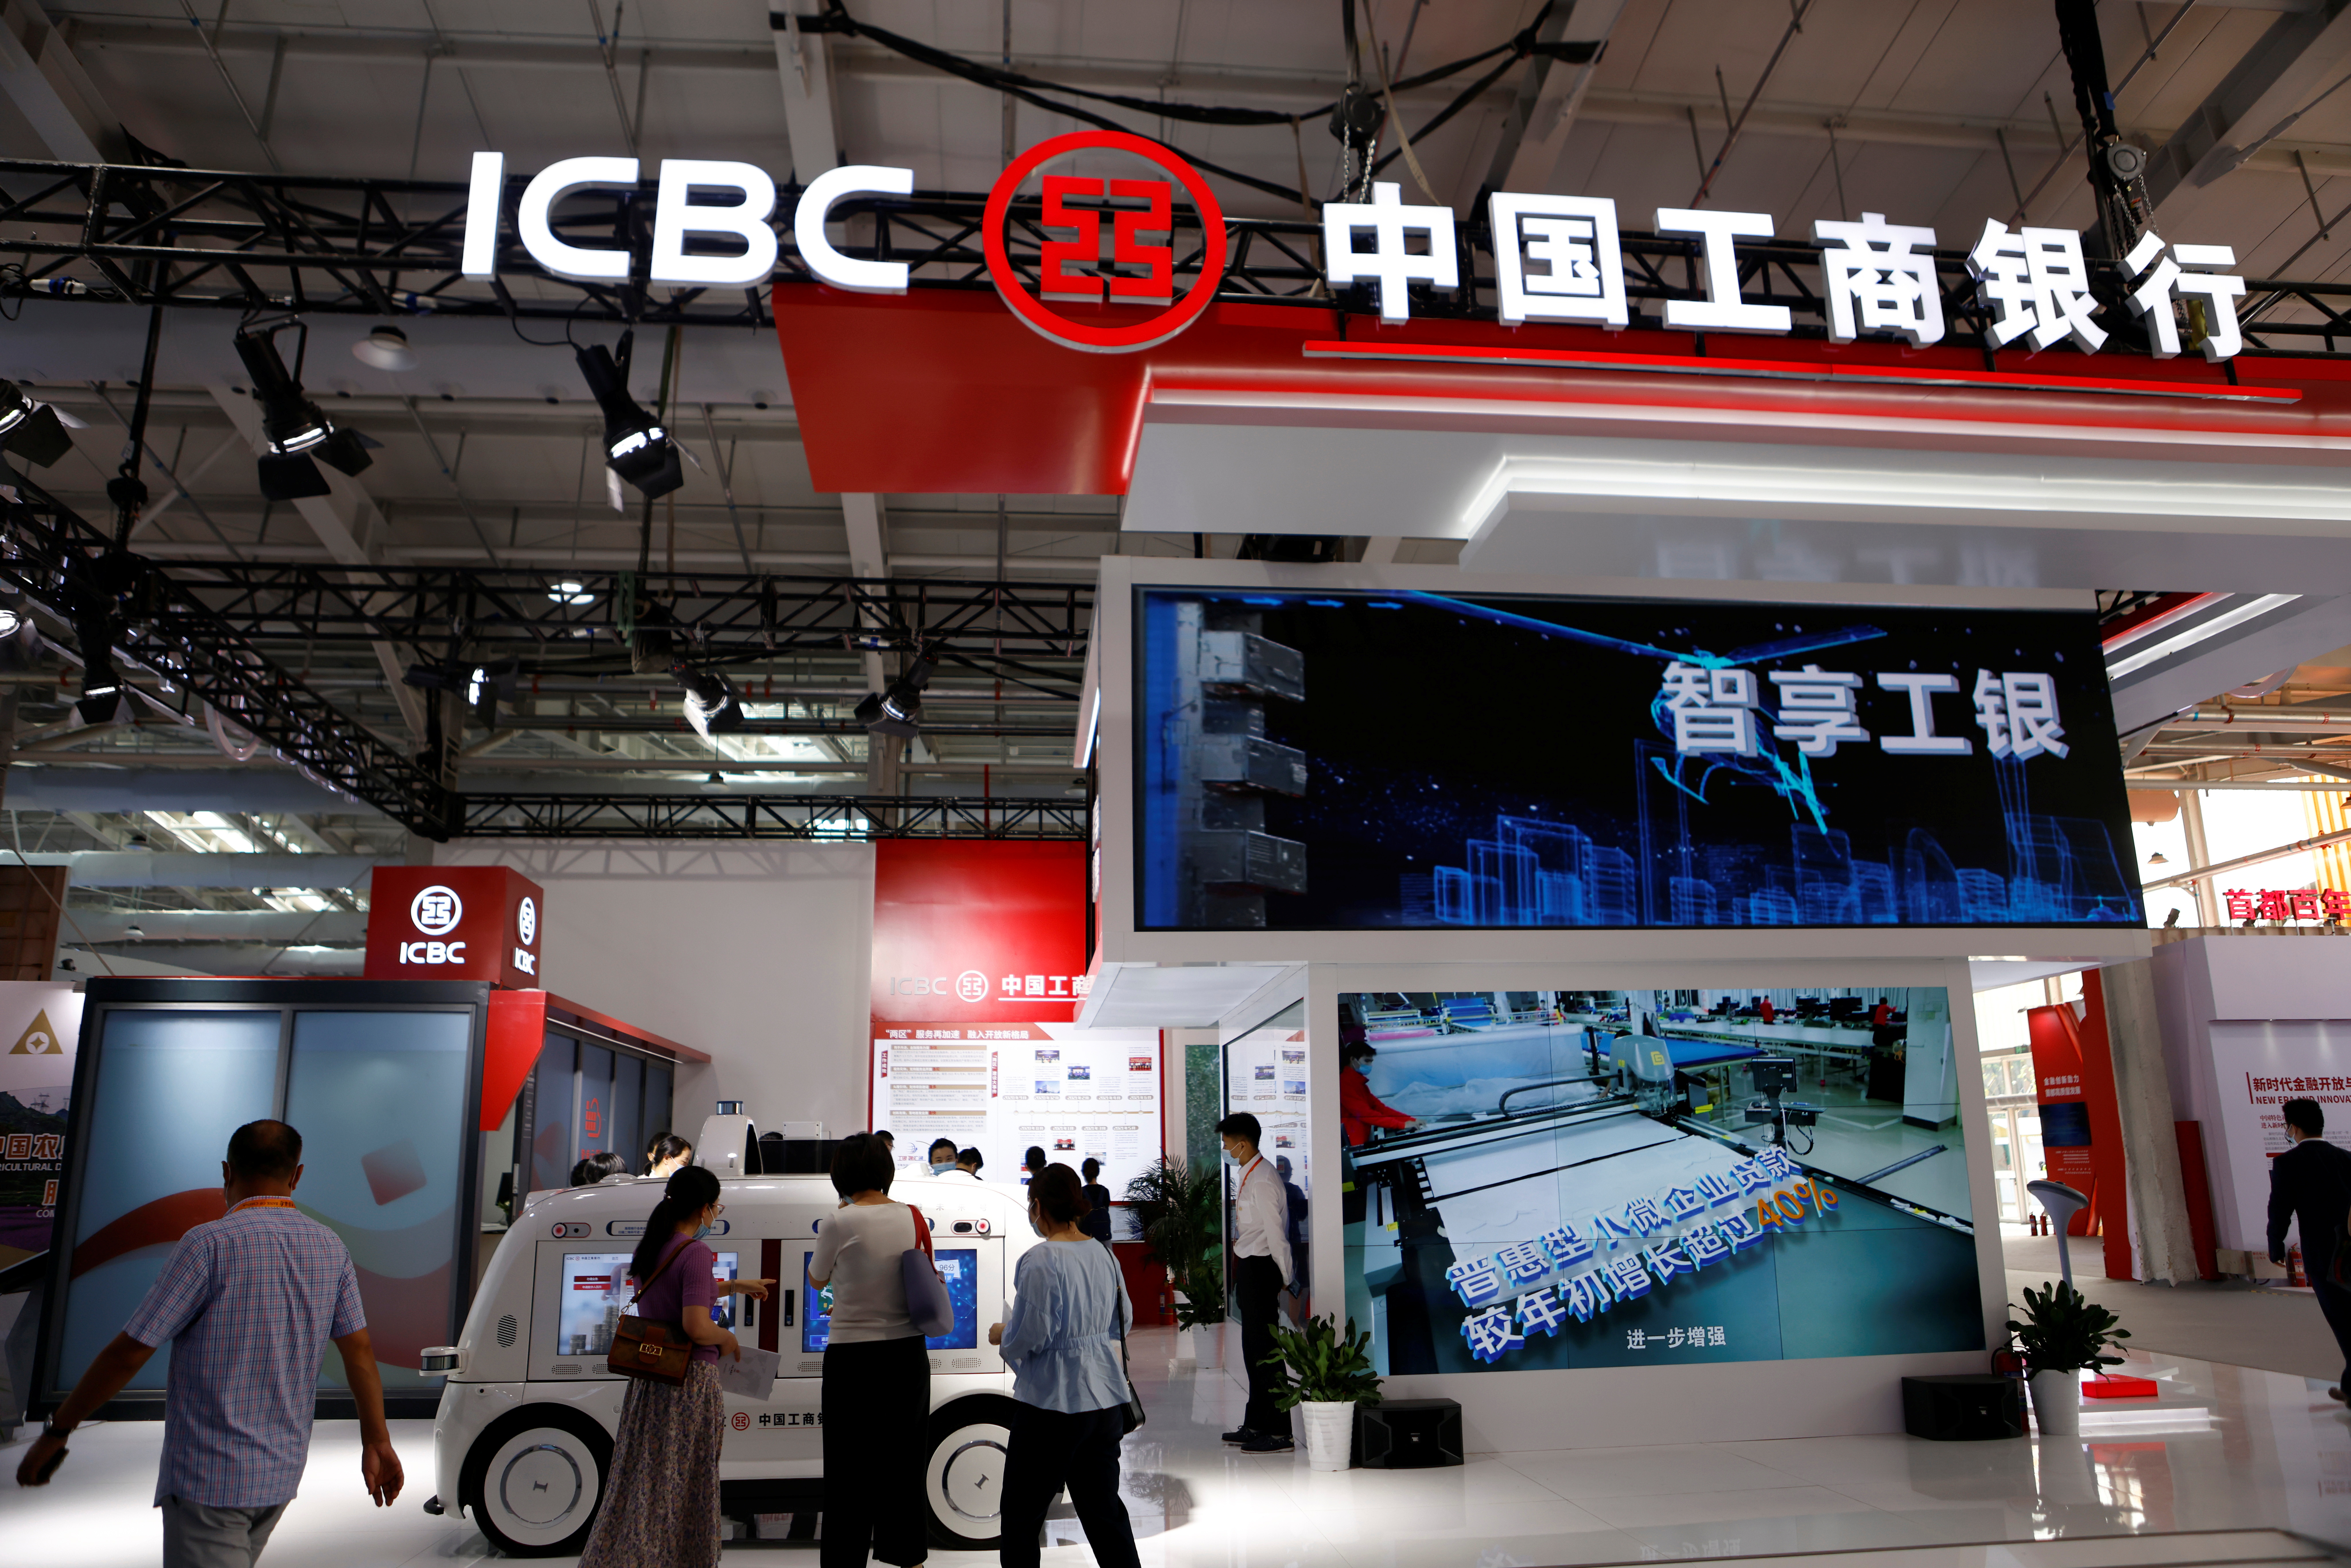 Industrial and Commercial Bank of China (ICBC) in Beijing